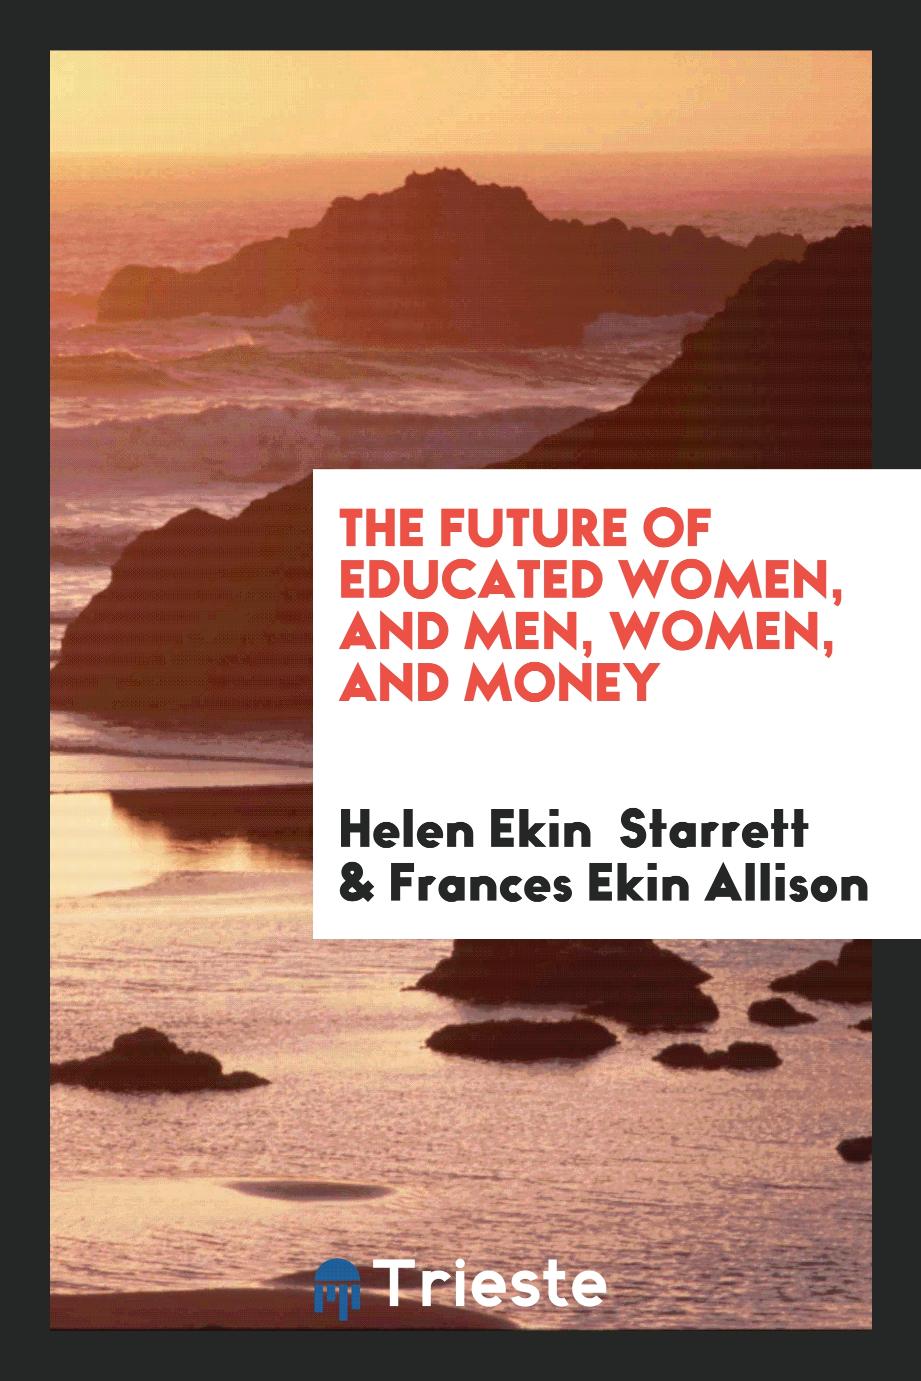 The Future of Educated Women, and men, women, and money